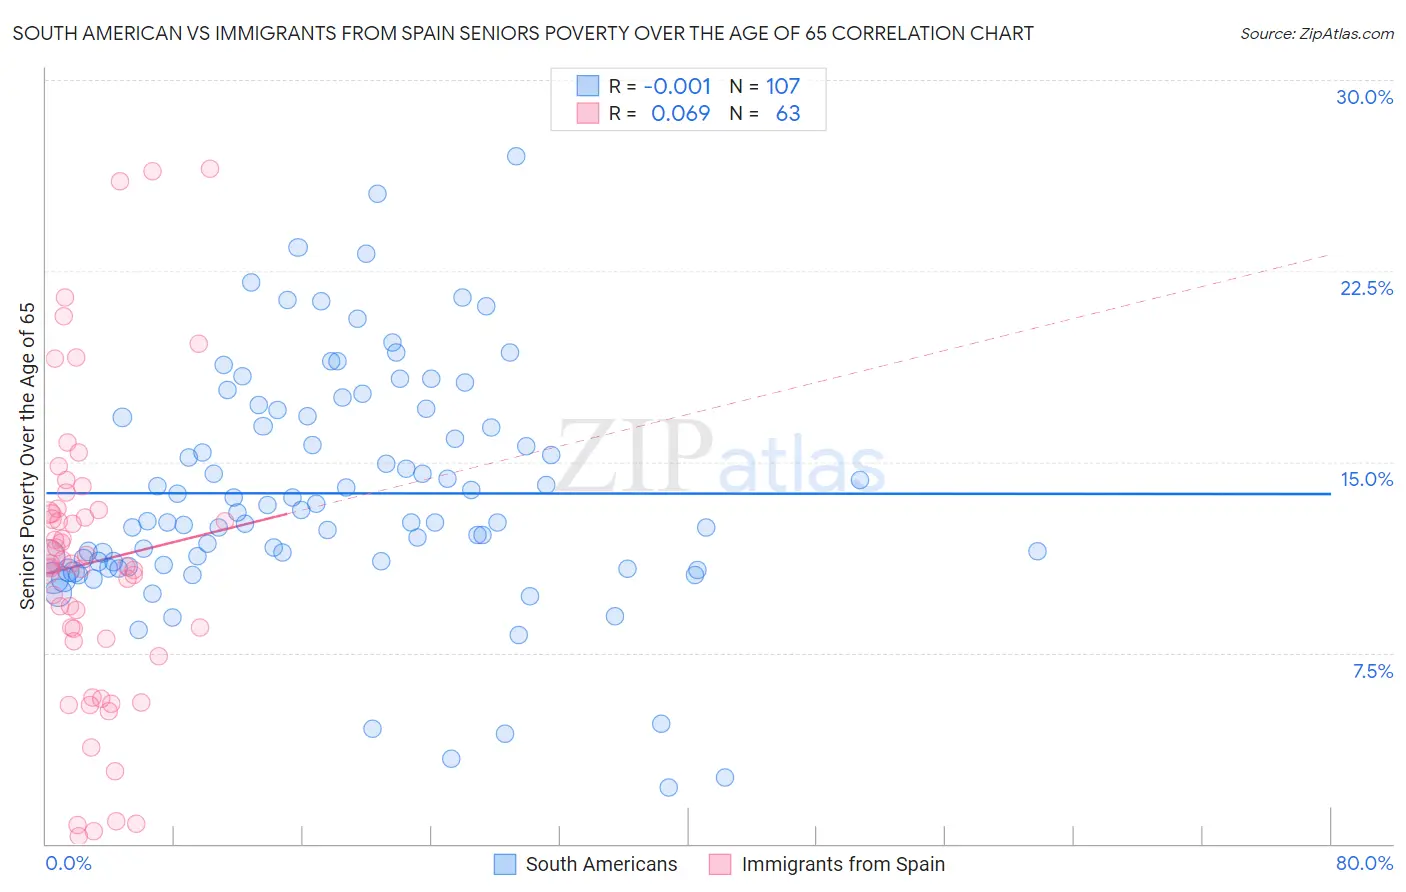 South American vs Immigrants from Spain Seniors Poverty Over the Age of 65